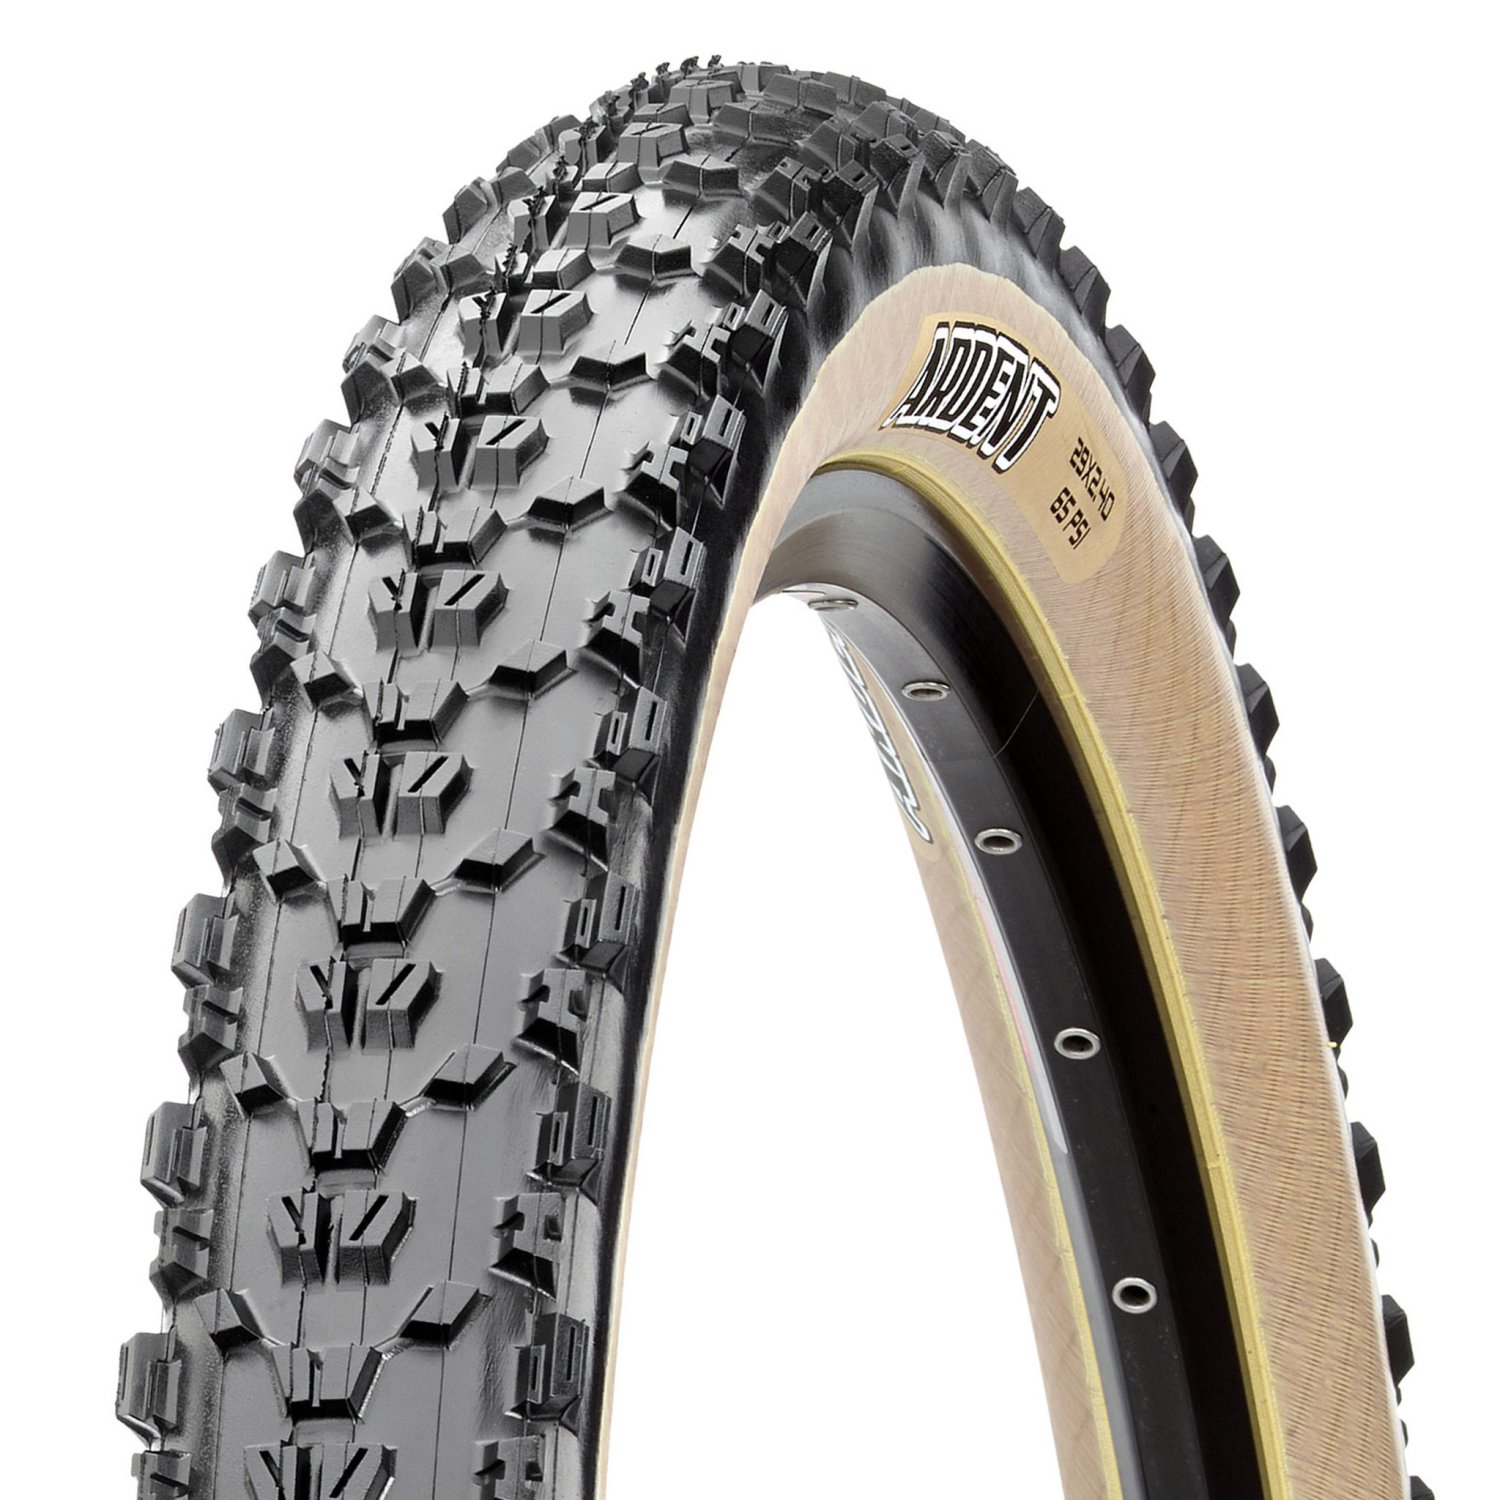 Покрышка велосипедная Maxxis Ardent-Tanwall, 29x2.4, 60 TPI wire 60a, TB96789100 покрышка maxxis beaver 29x2 0 60 tpi мтб tb96645000